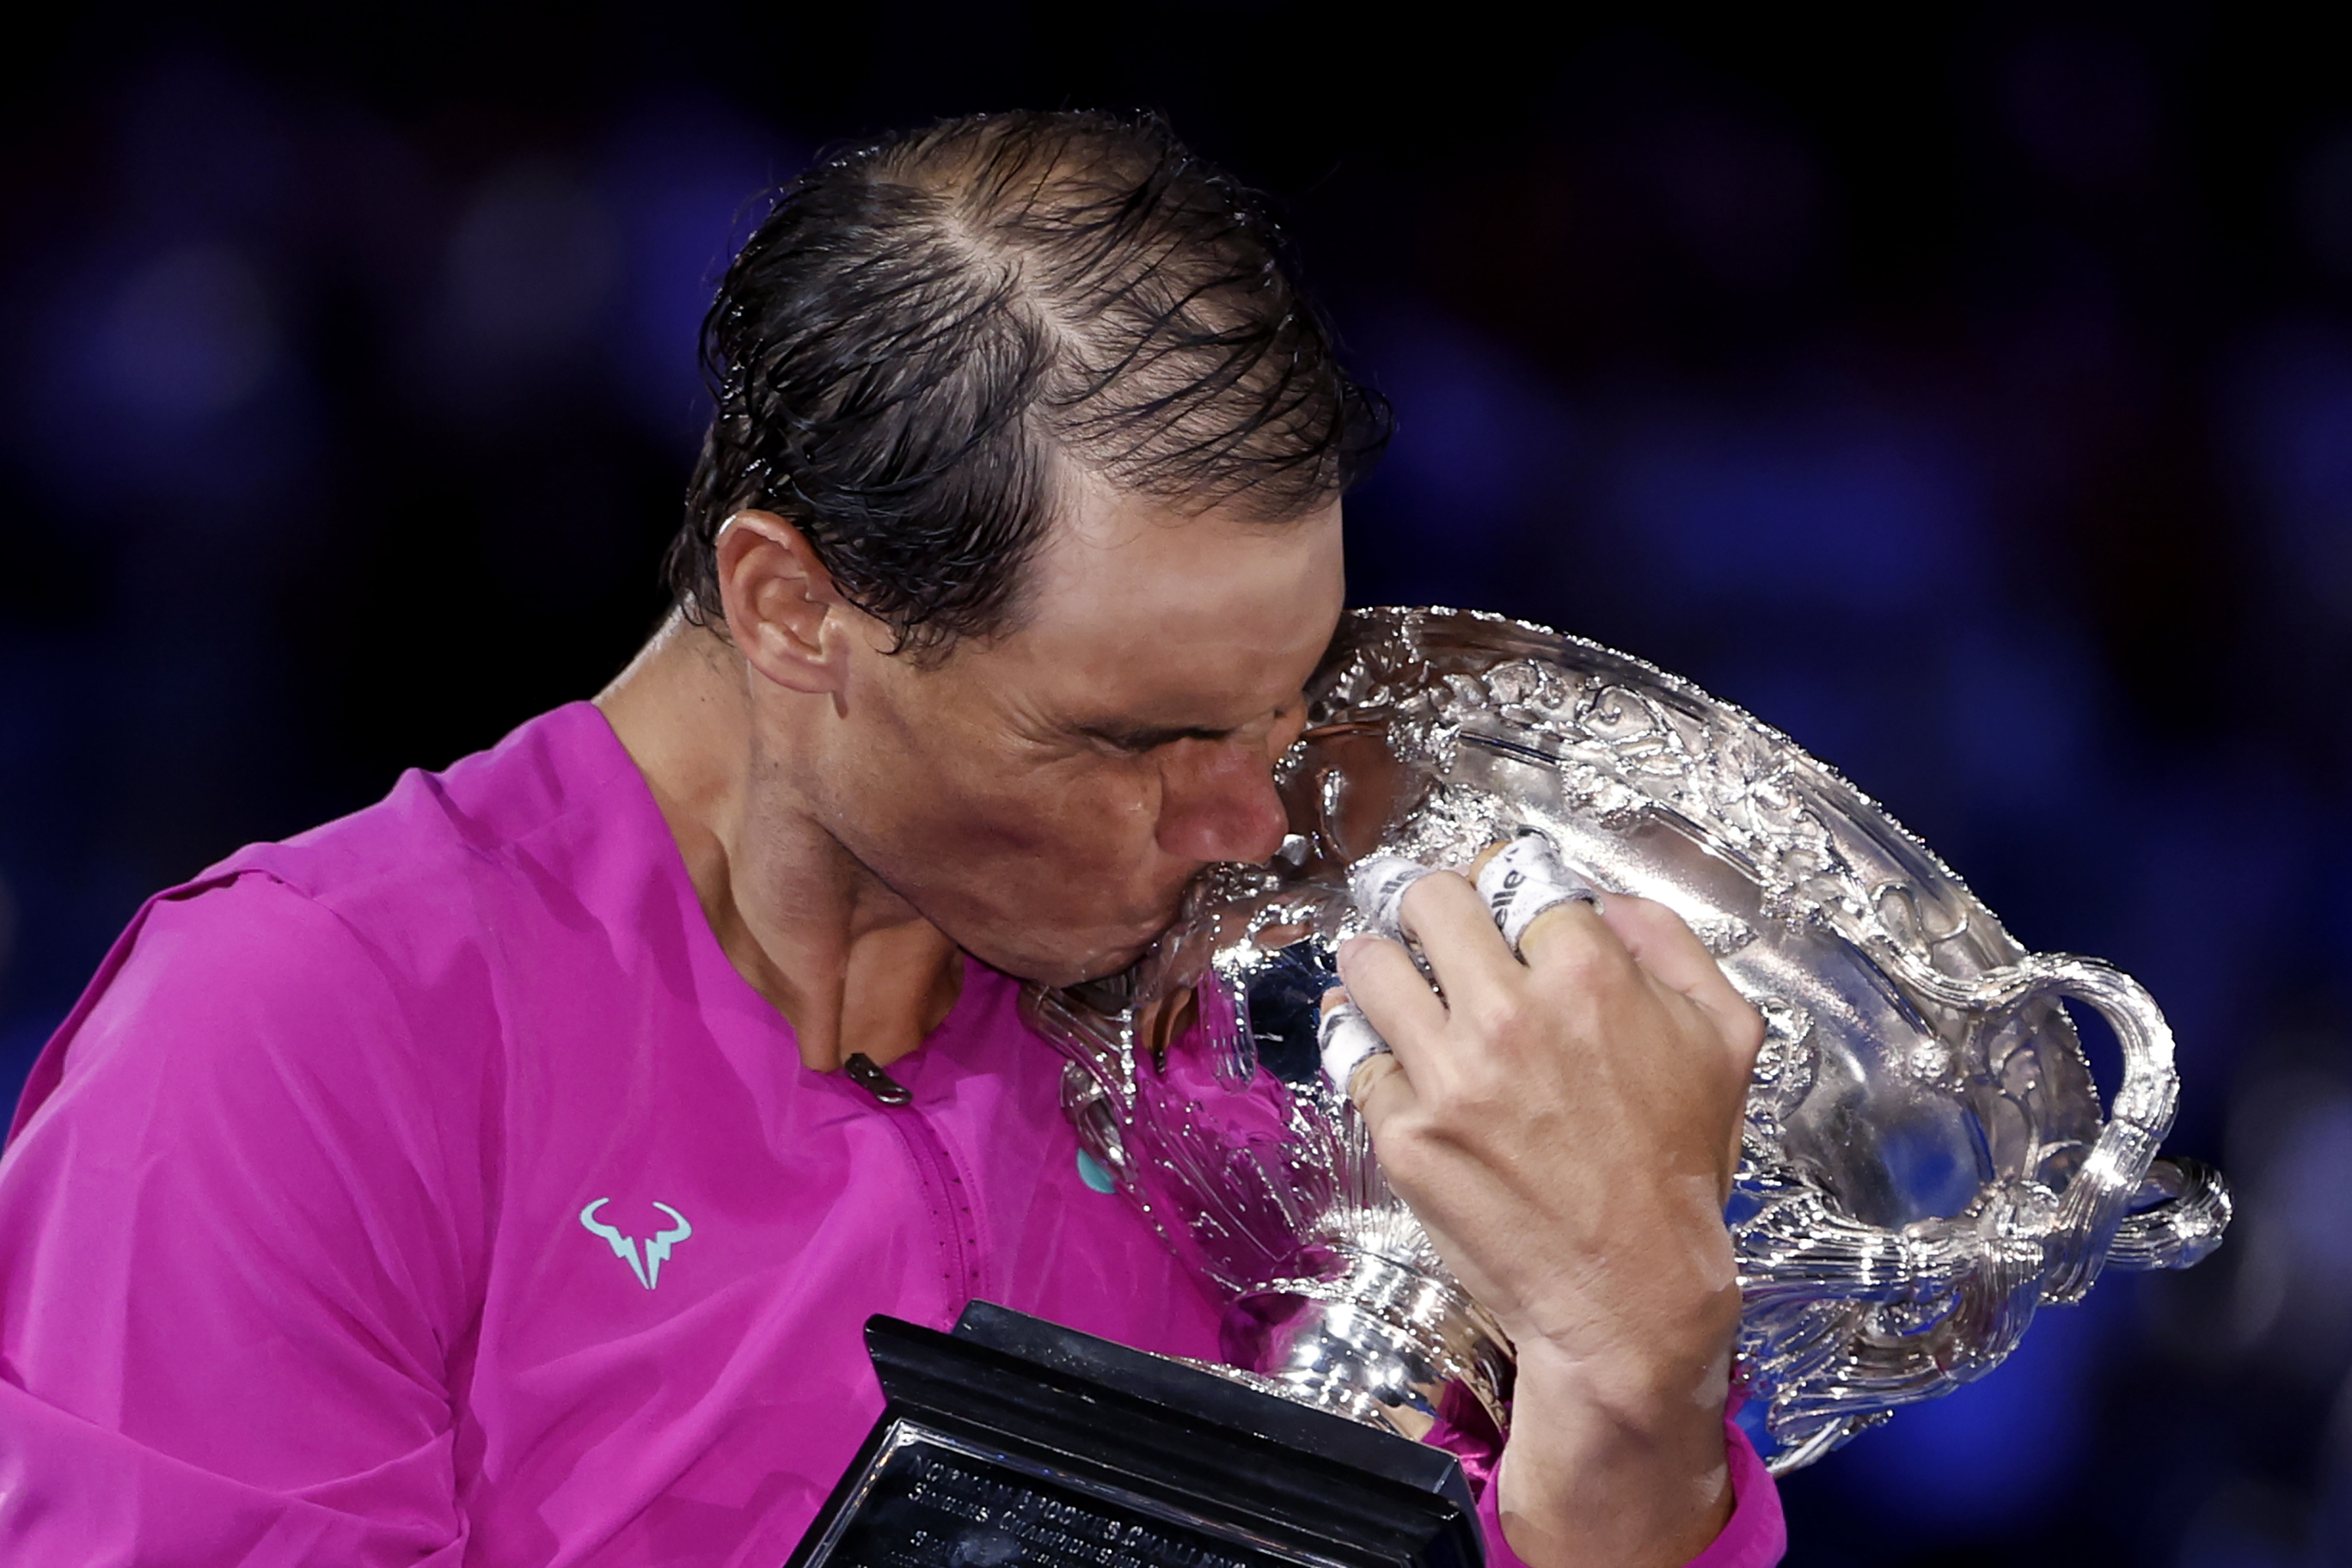 Rafael  lt;HIT gt;Nadal lt;/HIT gt; of Spain kisses the Norman Brookes Challenge Cup after defeating Daniil Medvedev of Russia in during the men's singles final at the Australian Open tennis championships in Melbourne, Australia, early Monday, Jan. 31, 2022. (AP Photo/Hamish Blair)